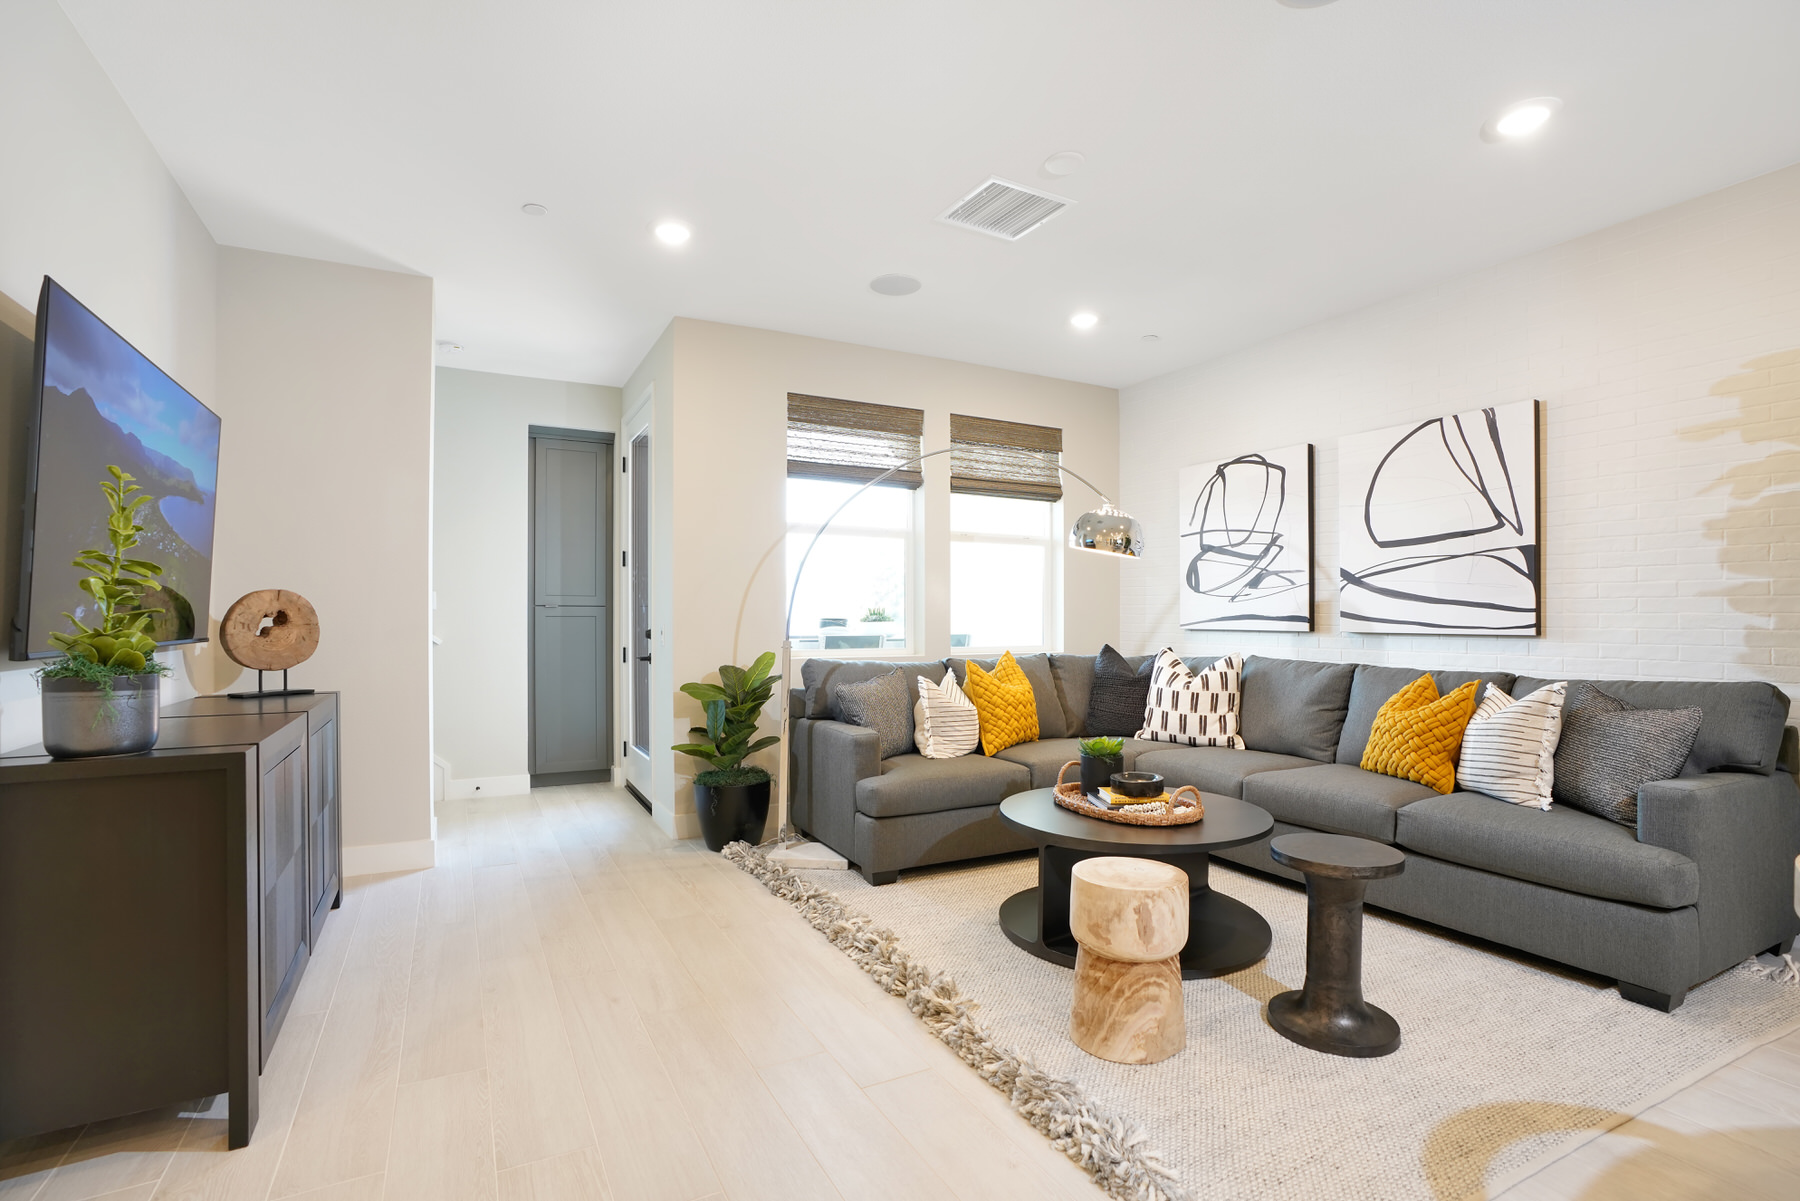 Living/Balcony in Plan 3A at Townes at Magnolia by Melia Homes in Anaheim, CA